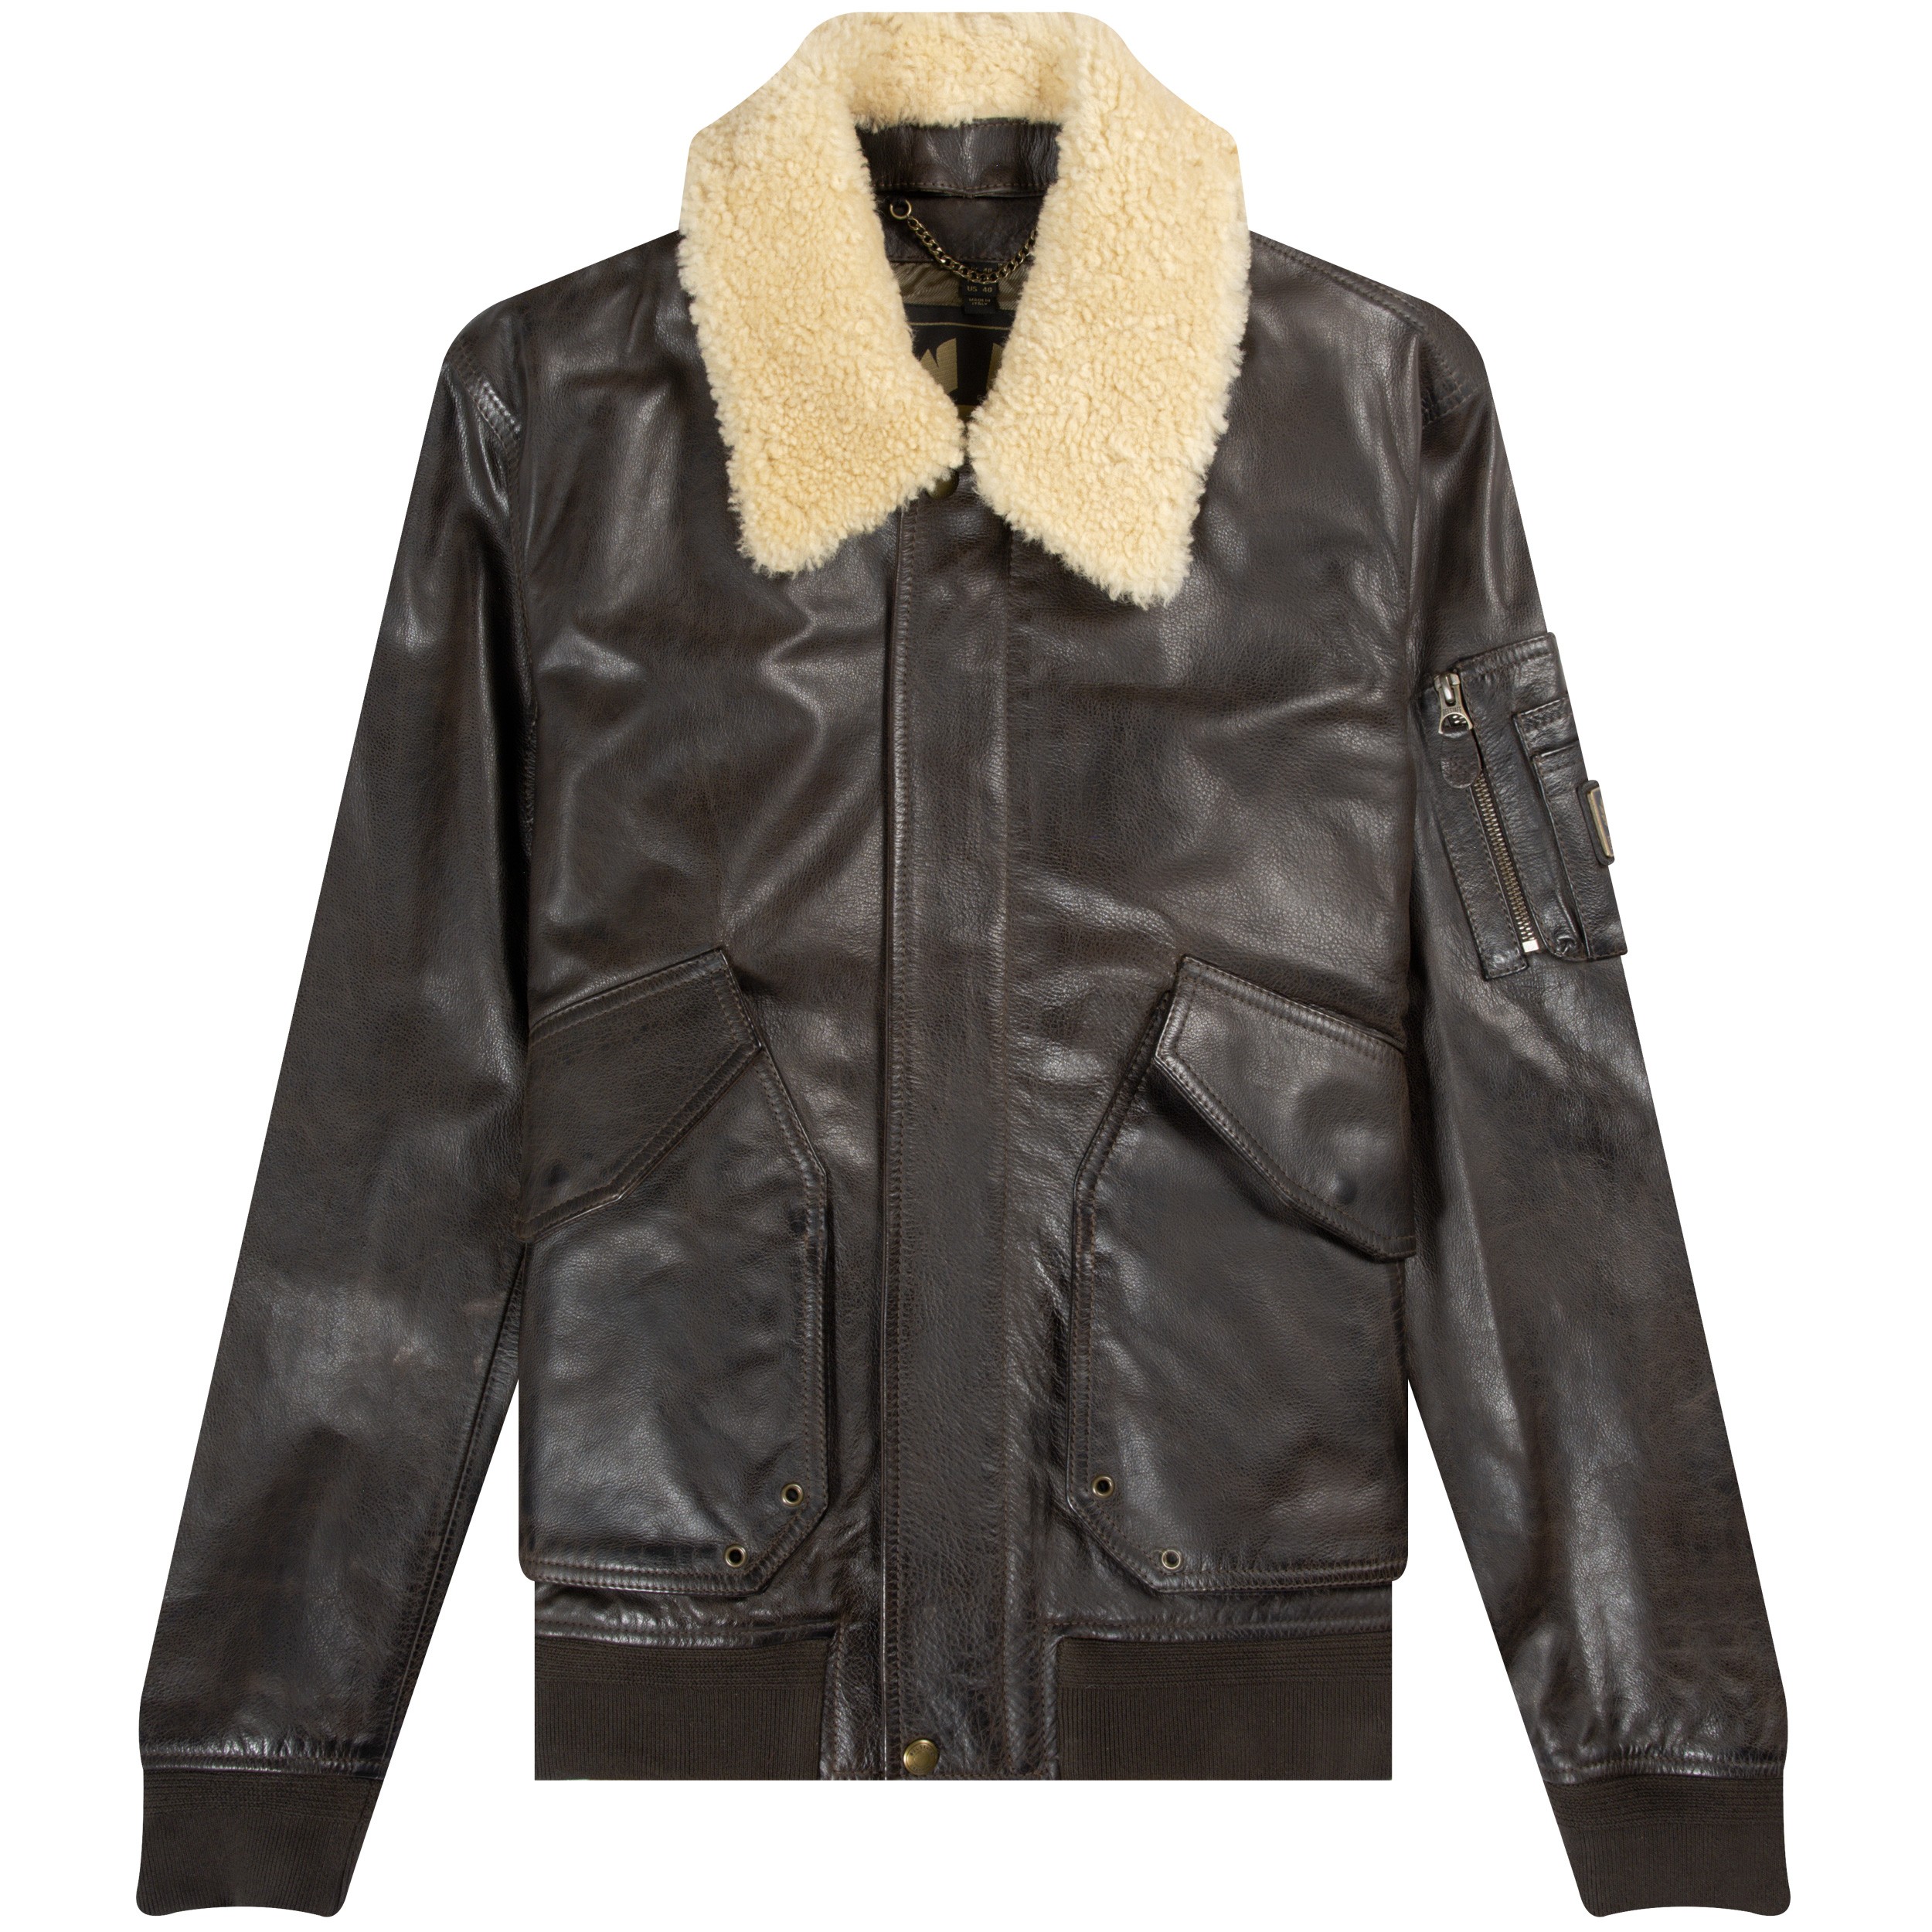 Belstaff 'Carrier' Leather Jacket With Shearling Collar Brown